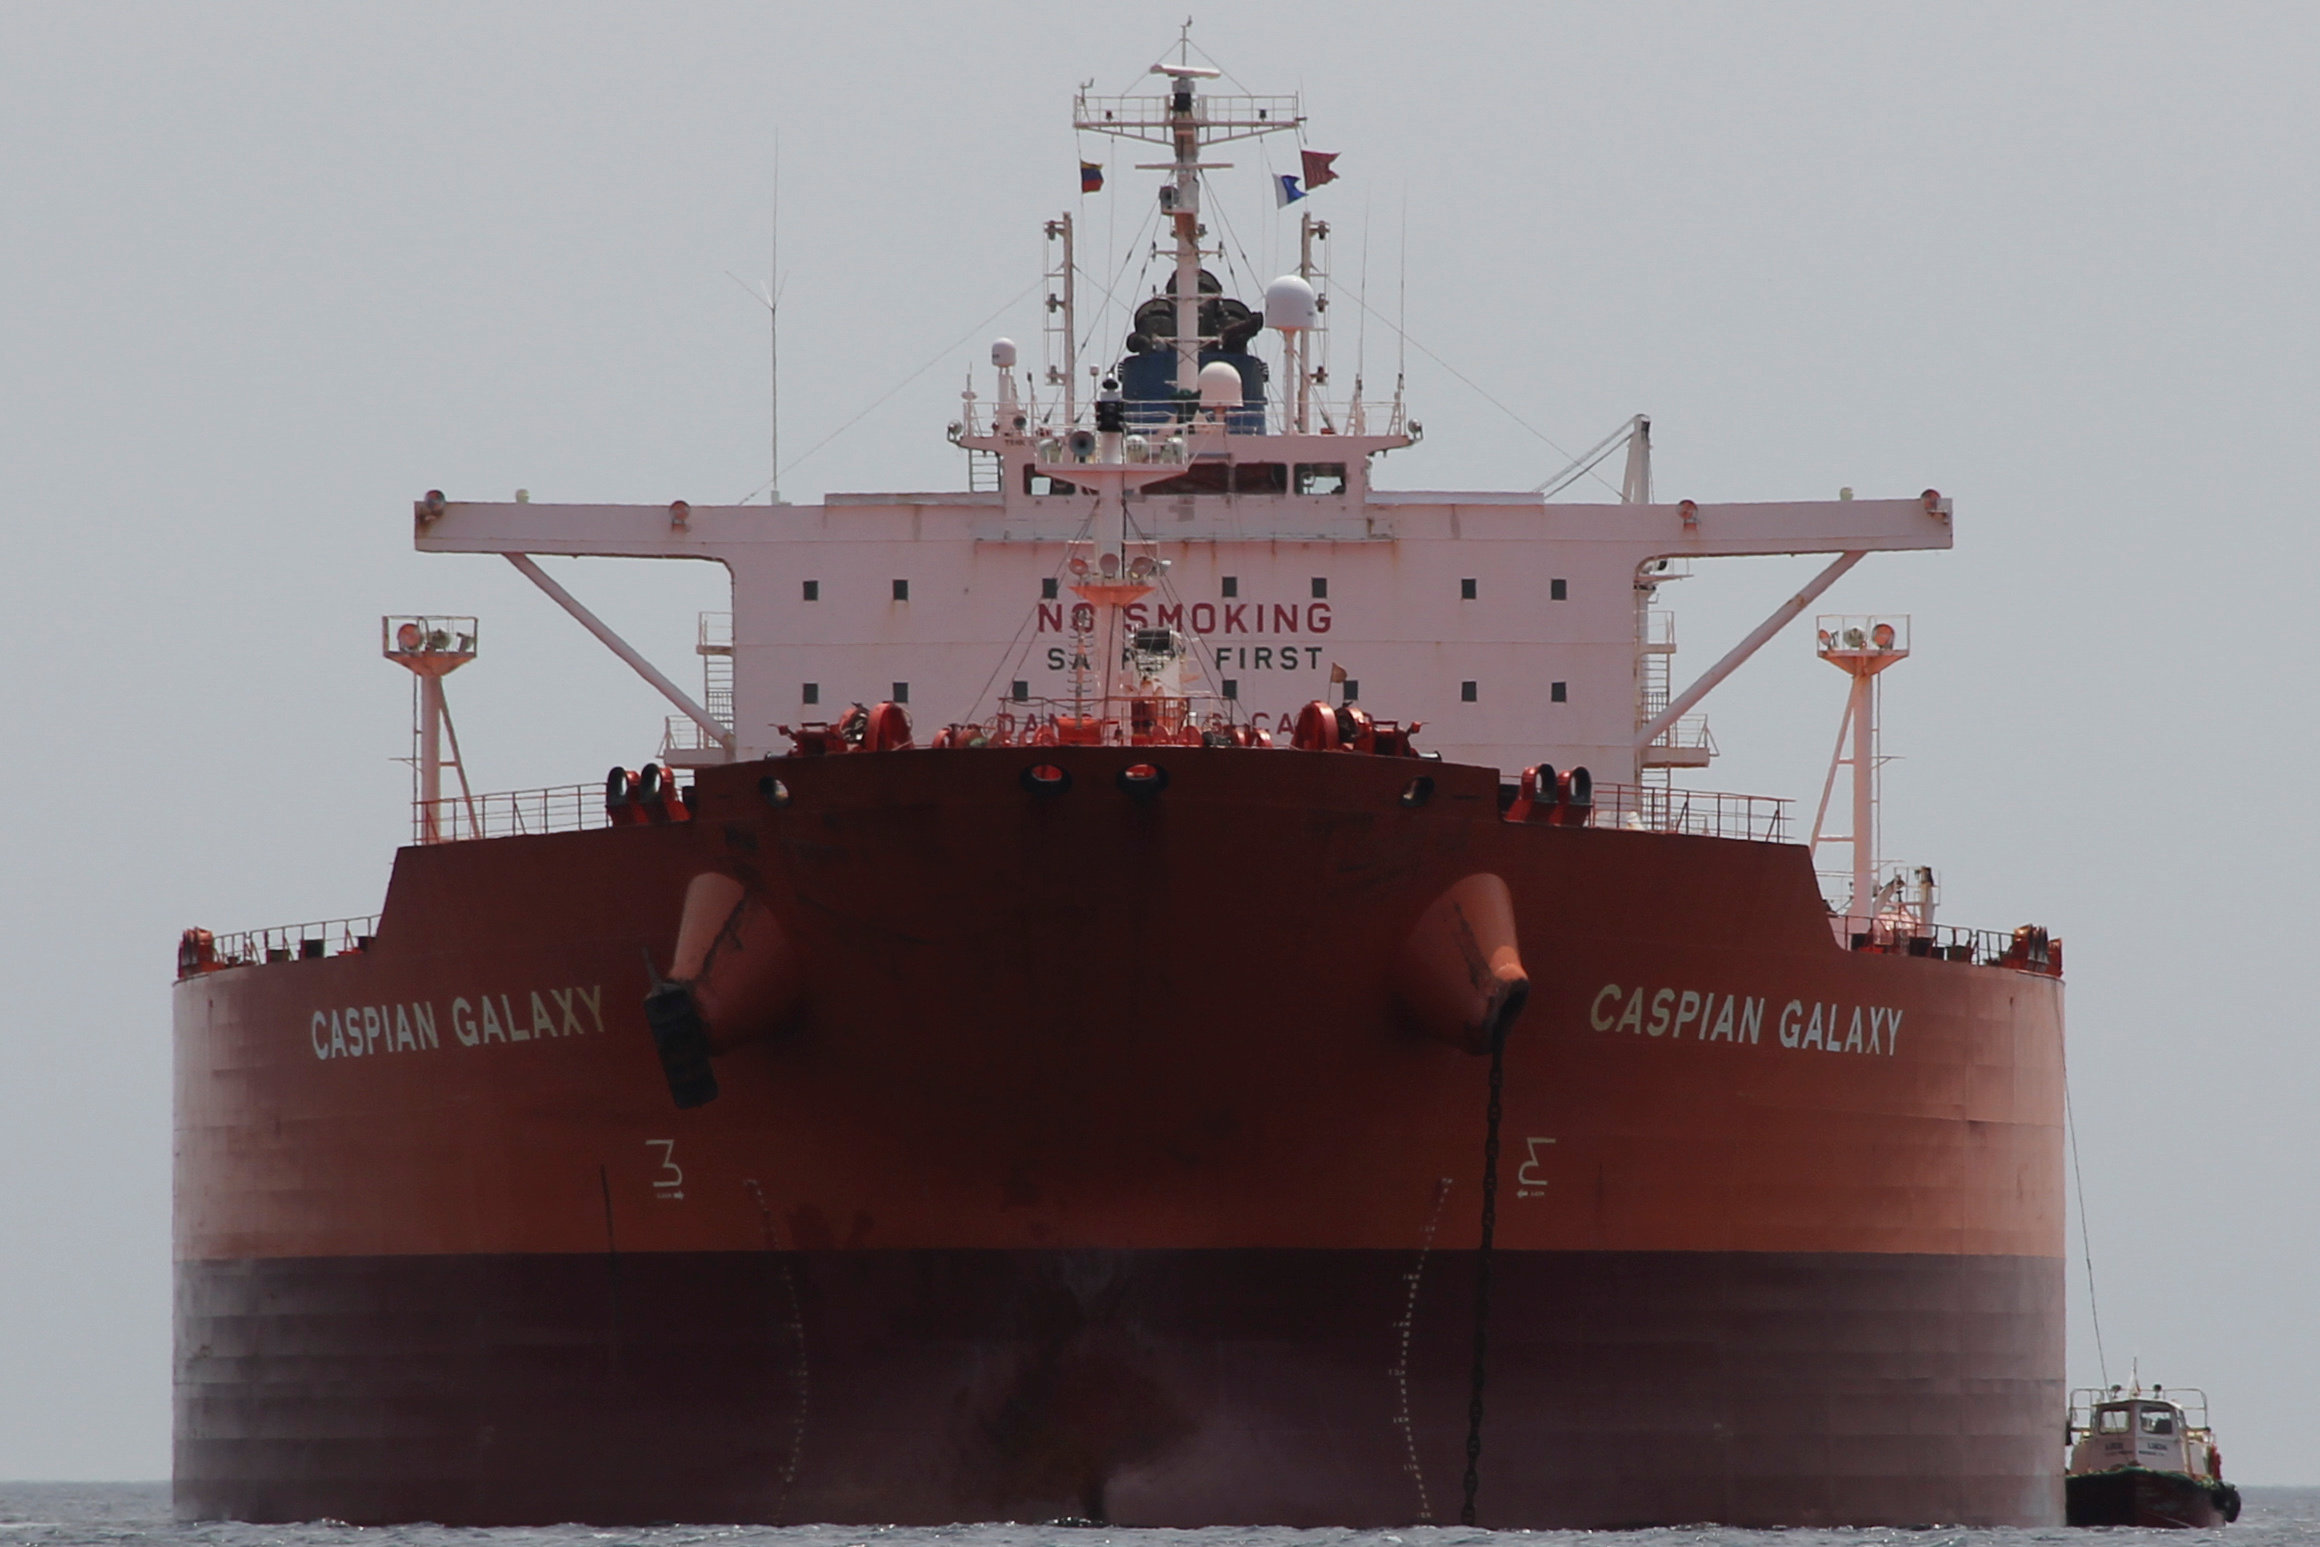 Gasoline stored in ships off Europe's coast threatens to sink profits